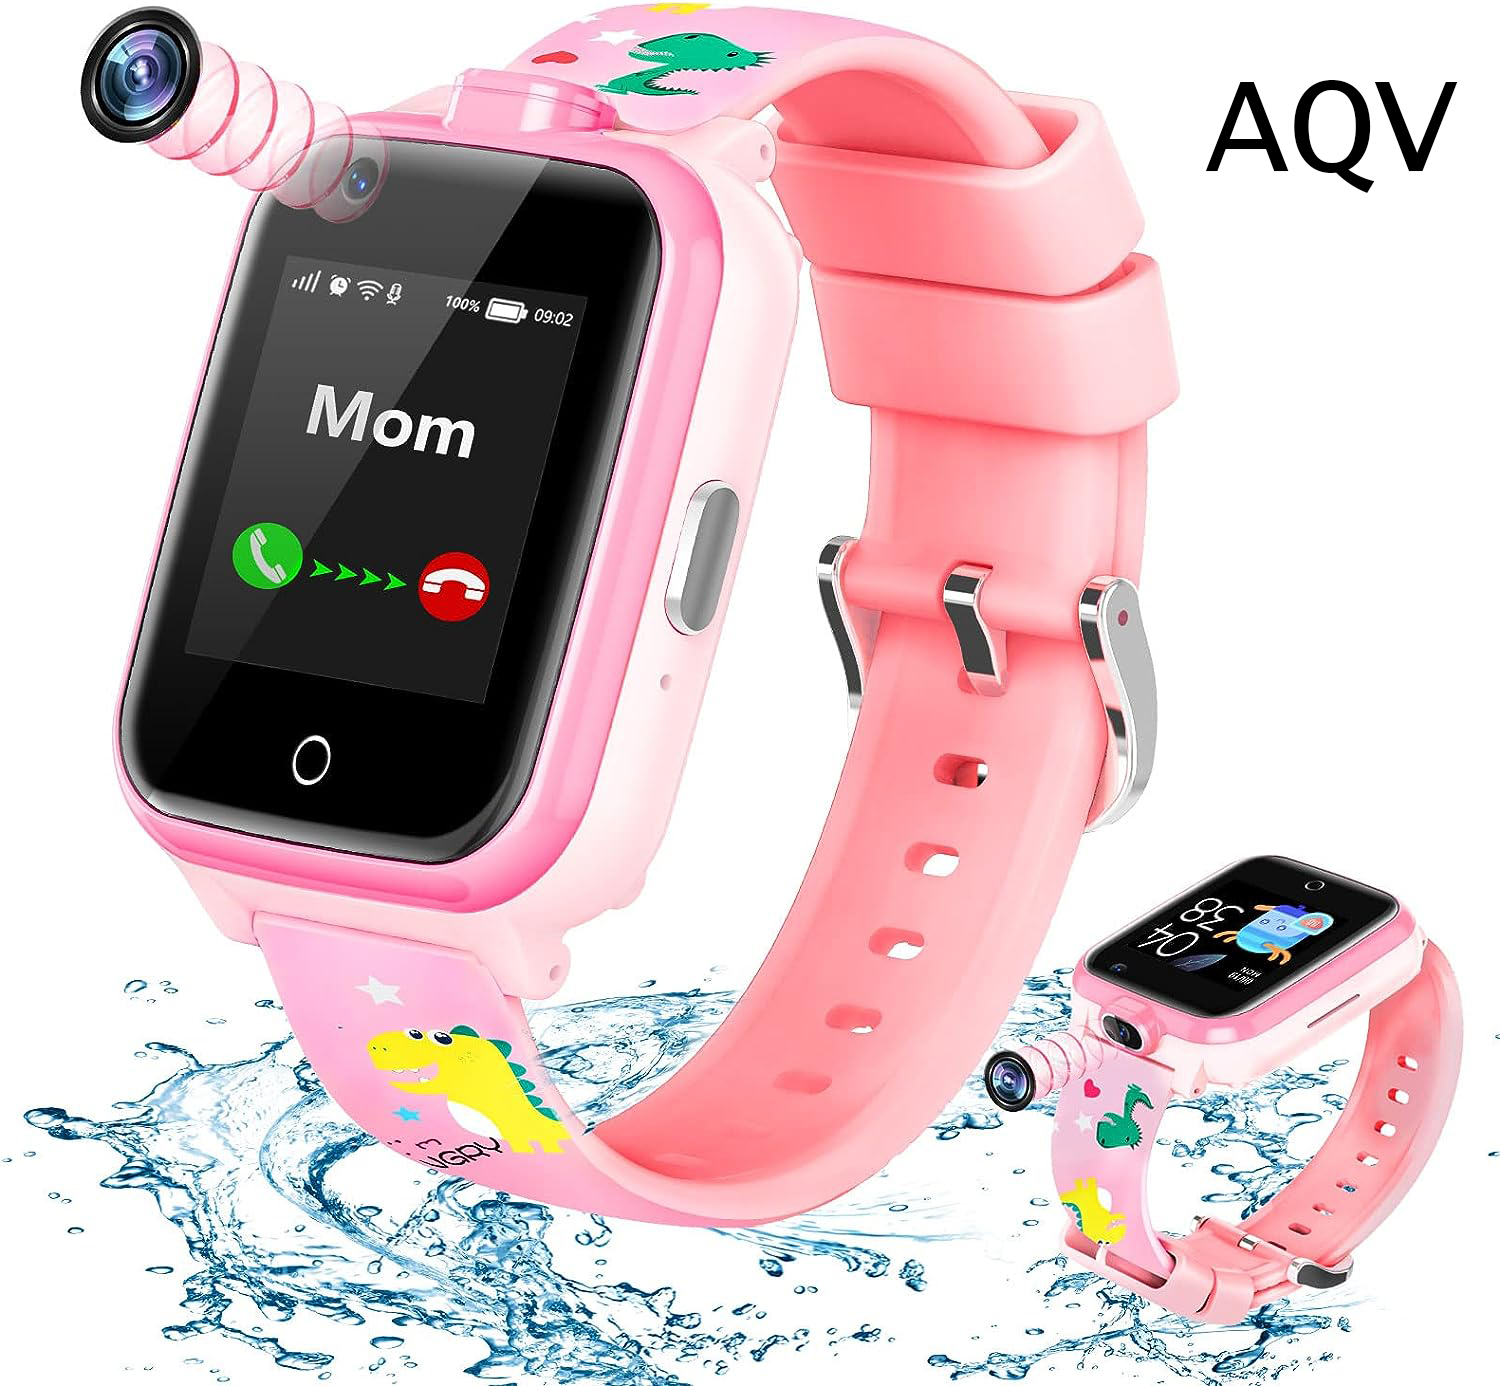 AQV Smart Watch for Kids with SIM Card,GPS Tracker Watch,4G Smart Watch with Dual Camera,2 Way Voice & Video Call SOS Alert Safe Smartwatch Phone for Ages 3-12 Boys Girls